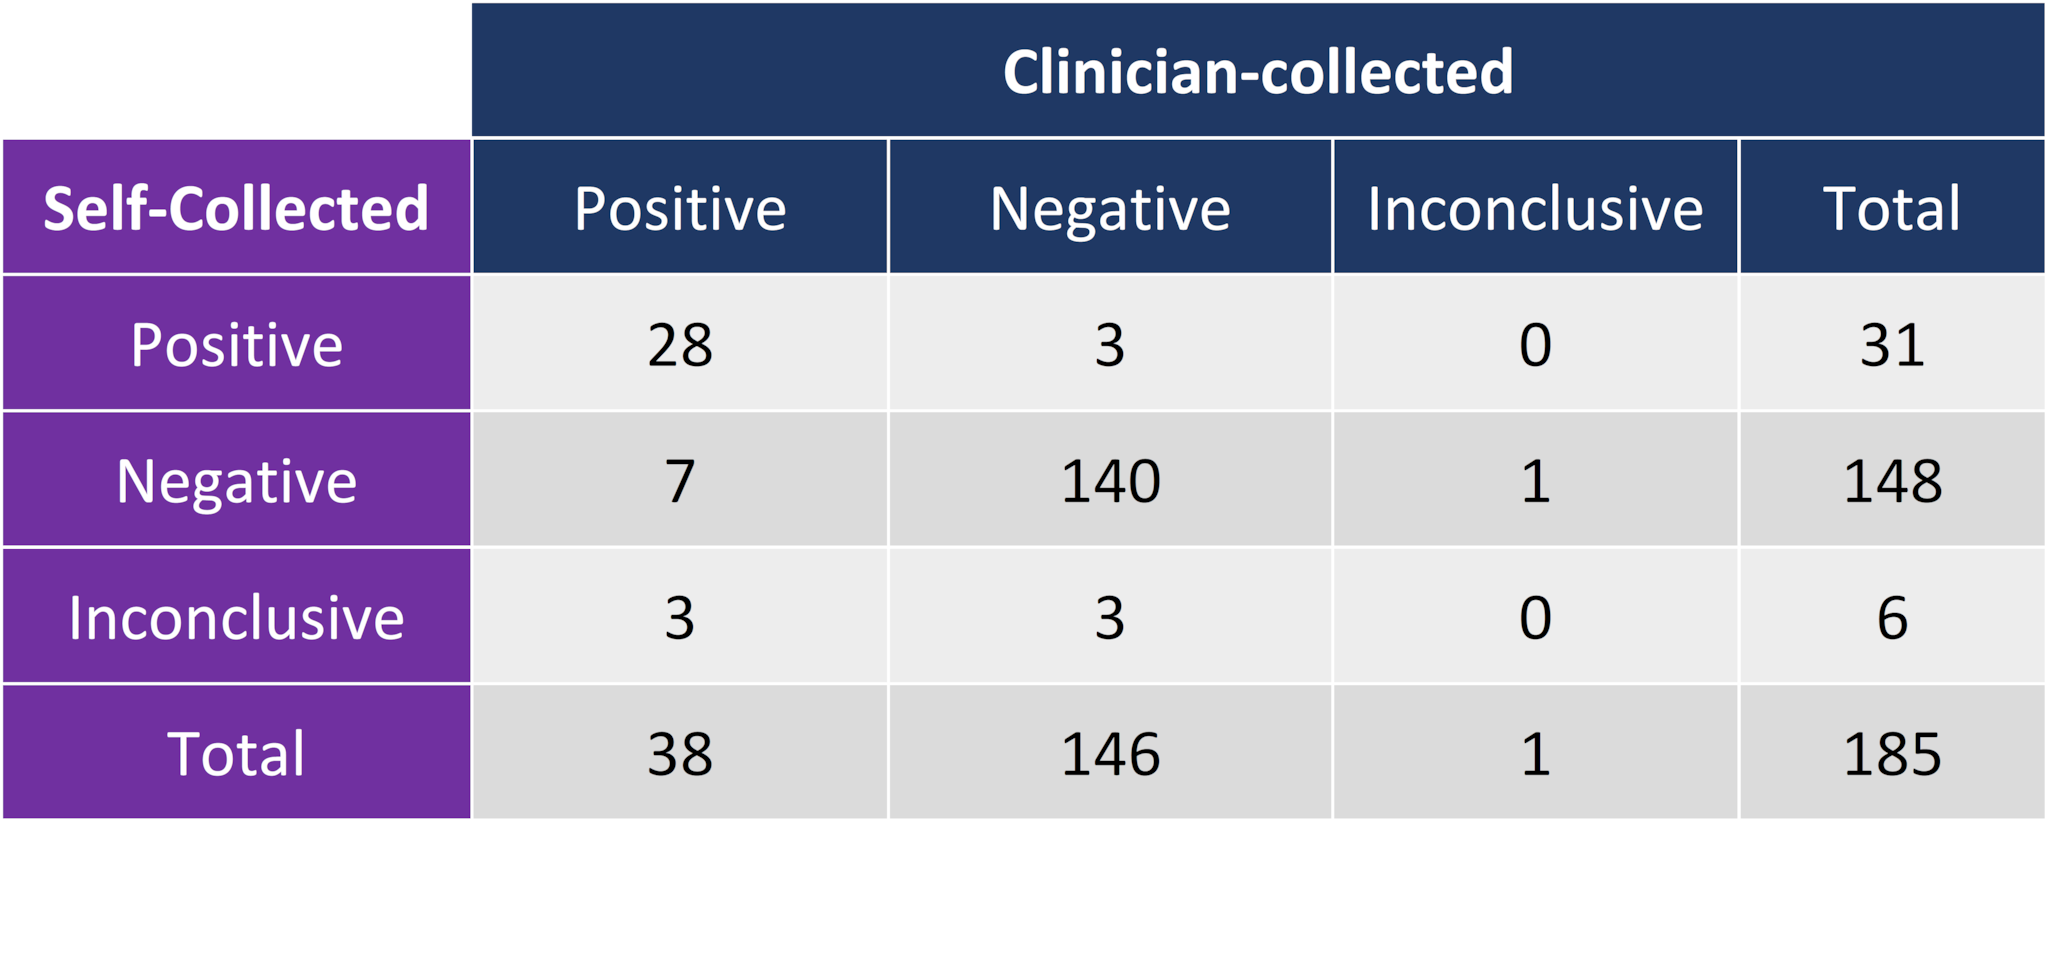 Clinician-collected NP swabs are the gold standard for performance assessment.